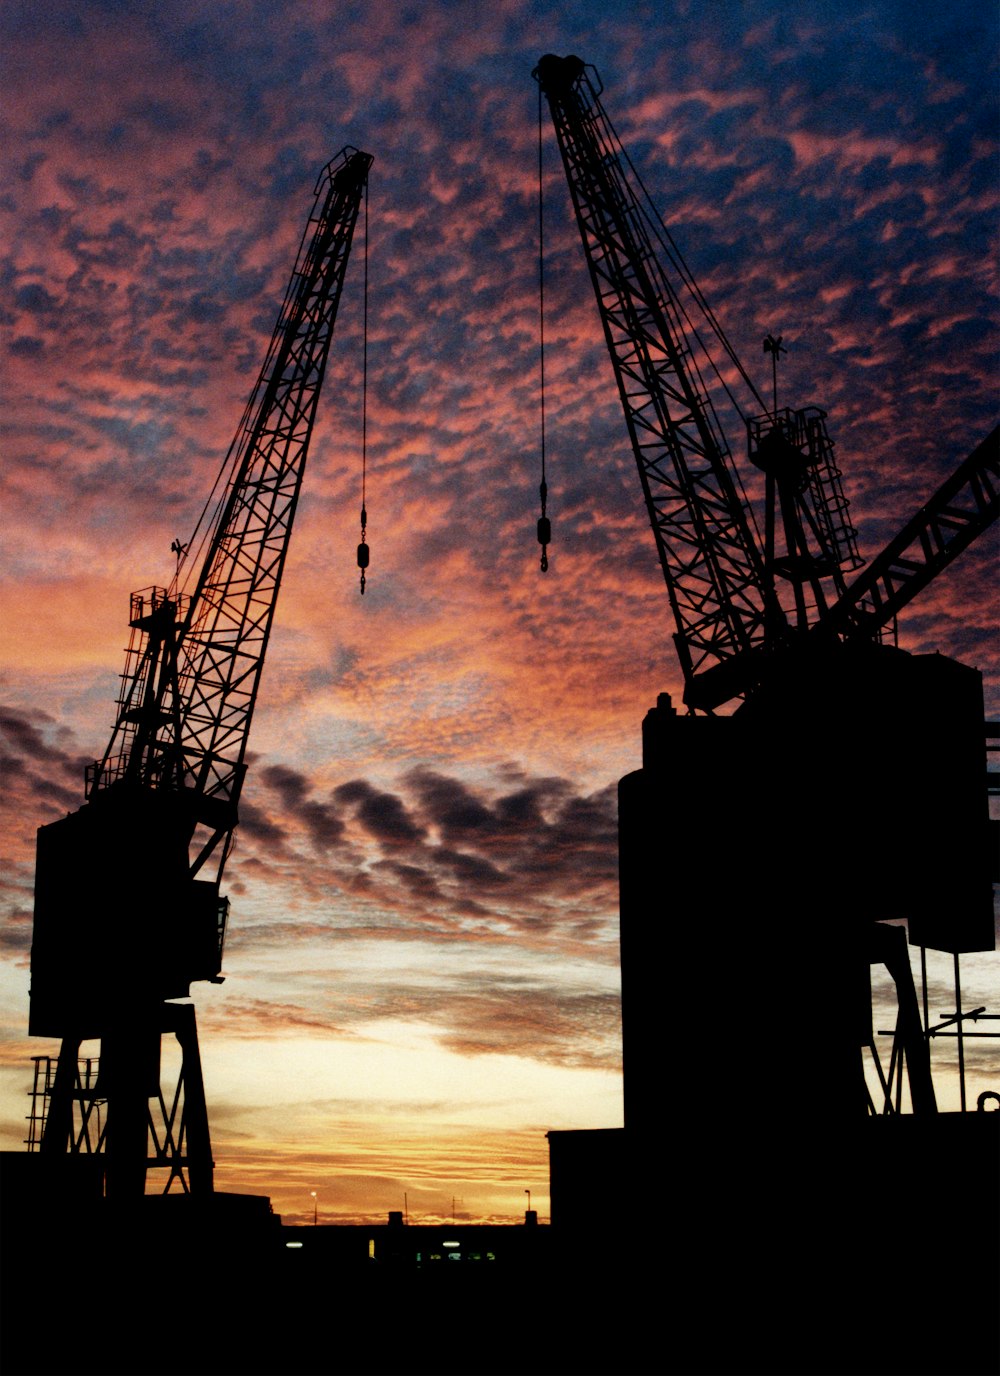 two cranes are silhouetted against a sunset sky